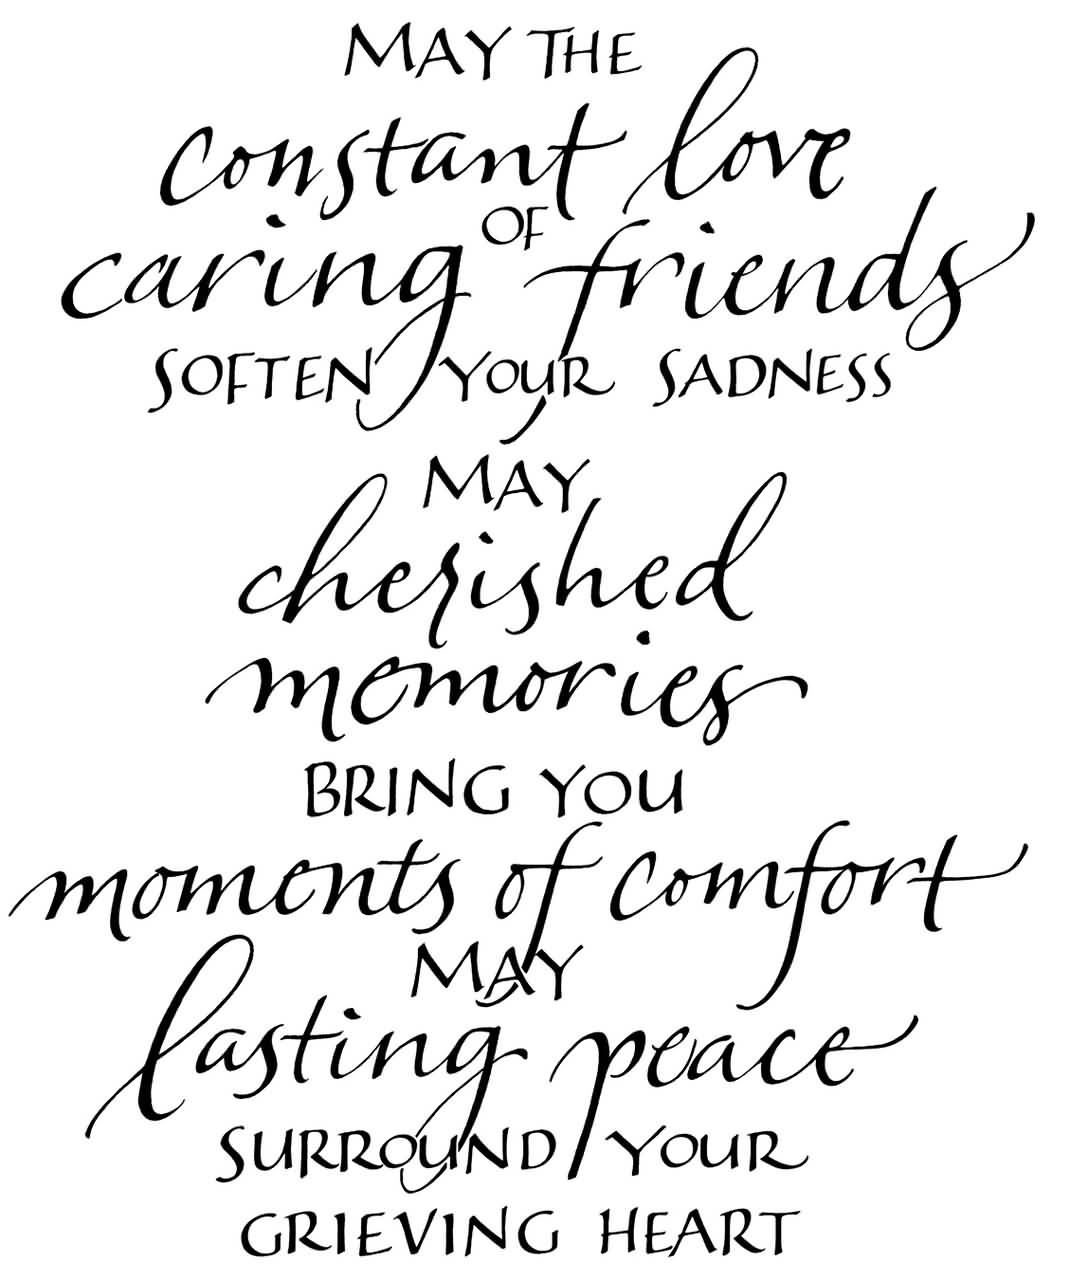 May The Constant Love Of Caring Friends Soften Your Sadness May Cherished Memories Bring You Moments Of Comfort May Lasting Peace Surround Your Grieving Heart